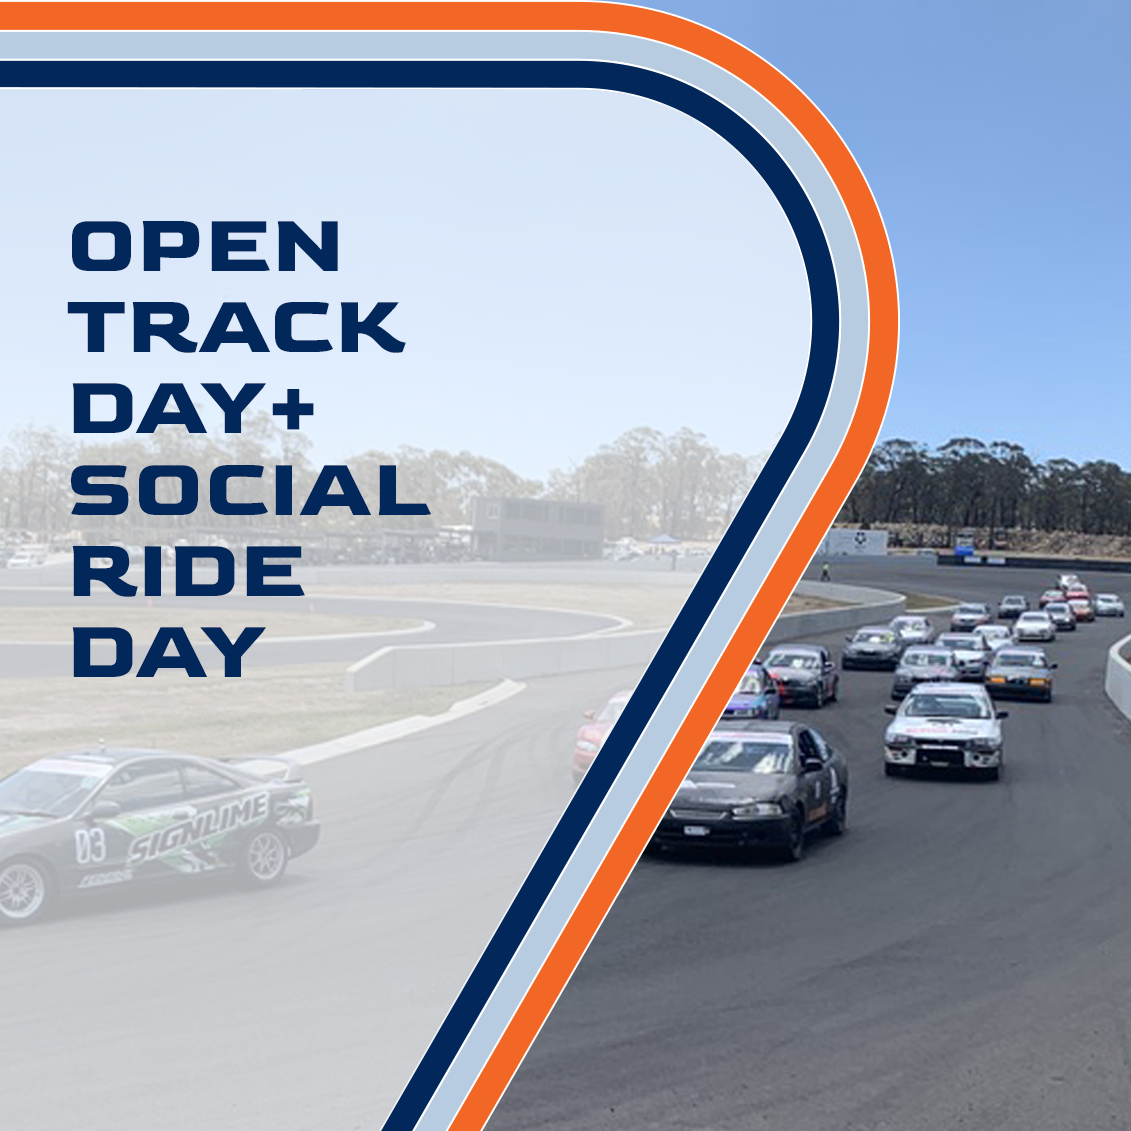 Open Track Day + Social Ride Day 12/1/23